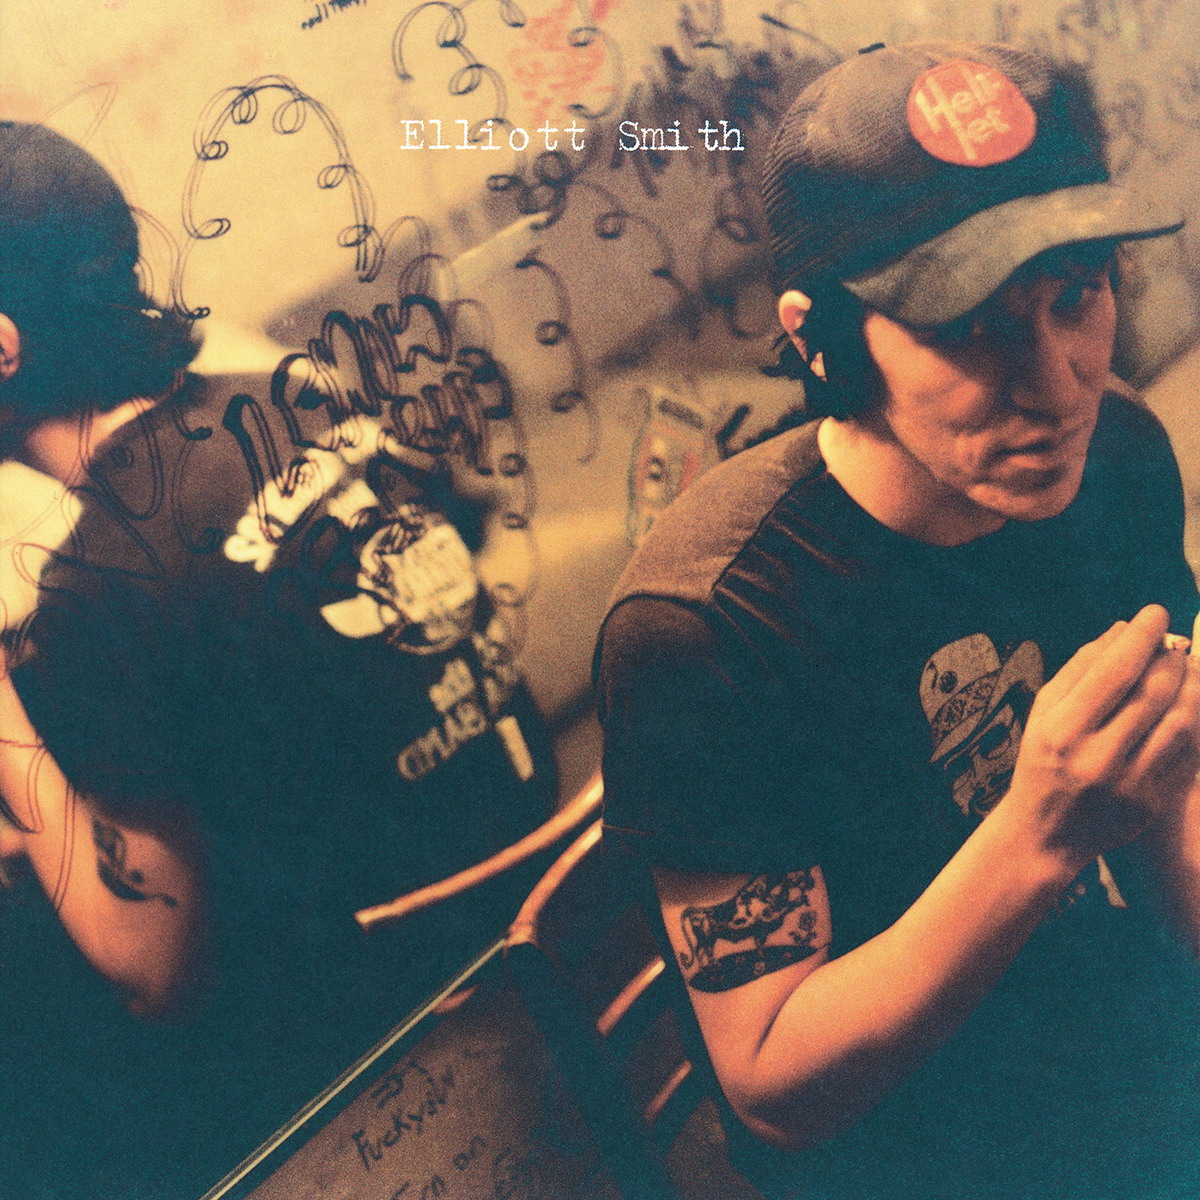 Elliott Smith - Either/Or (Expanded Edition) (1997/2017) [Bandcamp FLAC 24bit/44,1kHz]